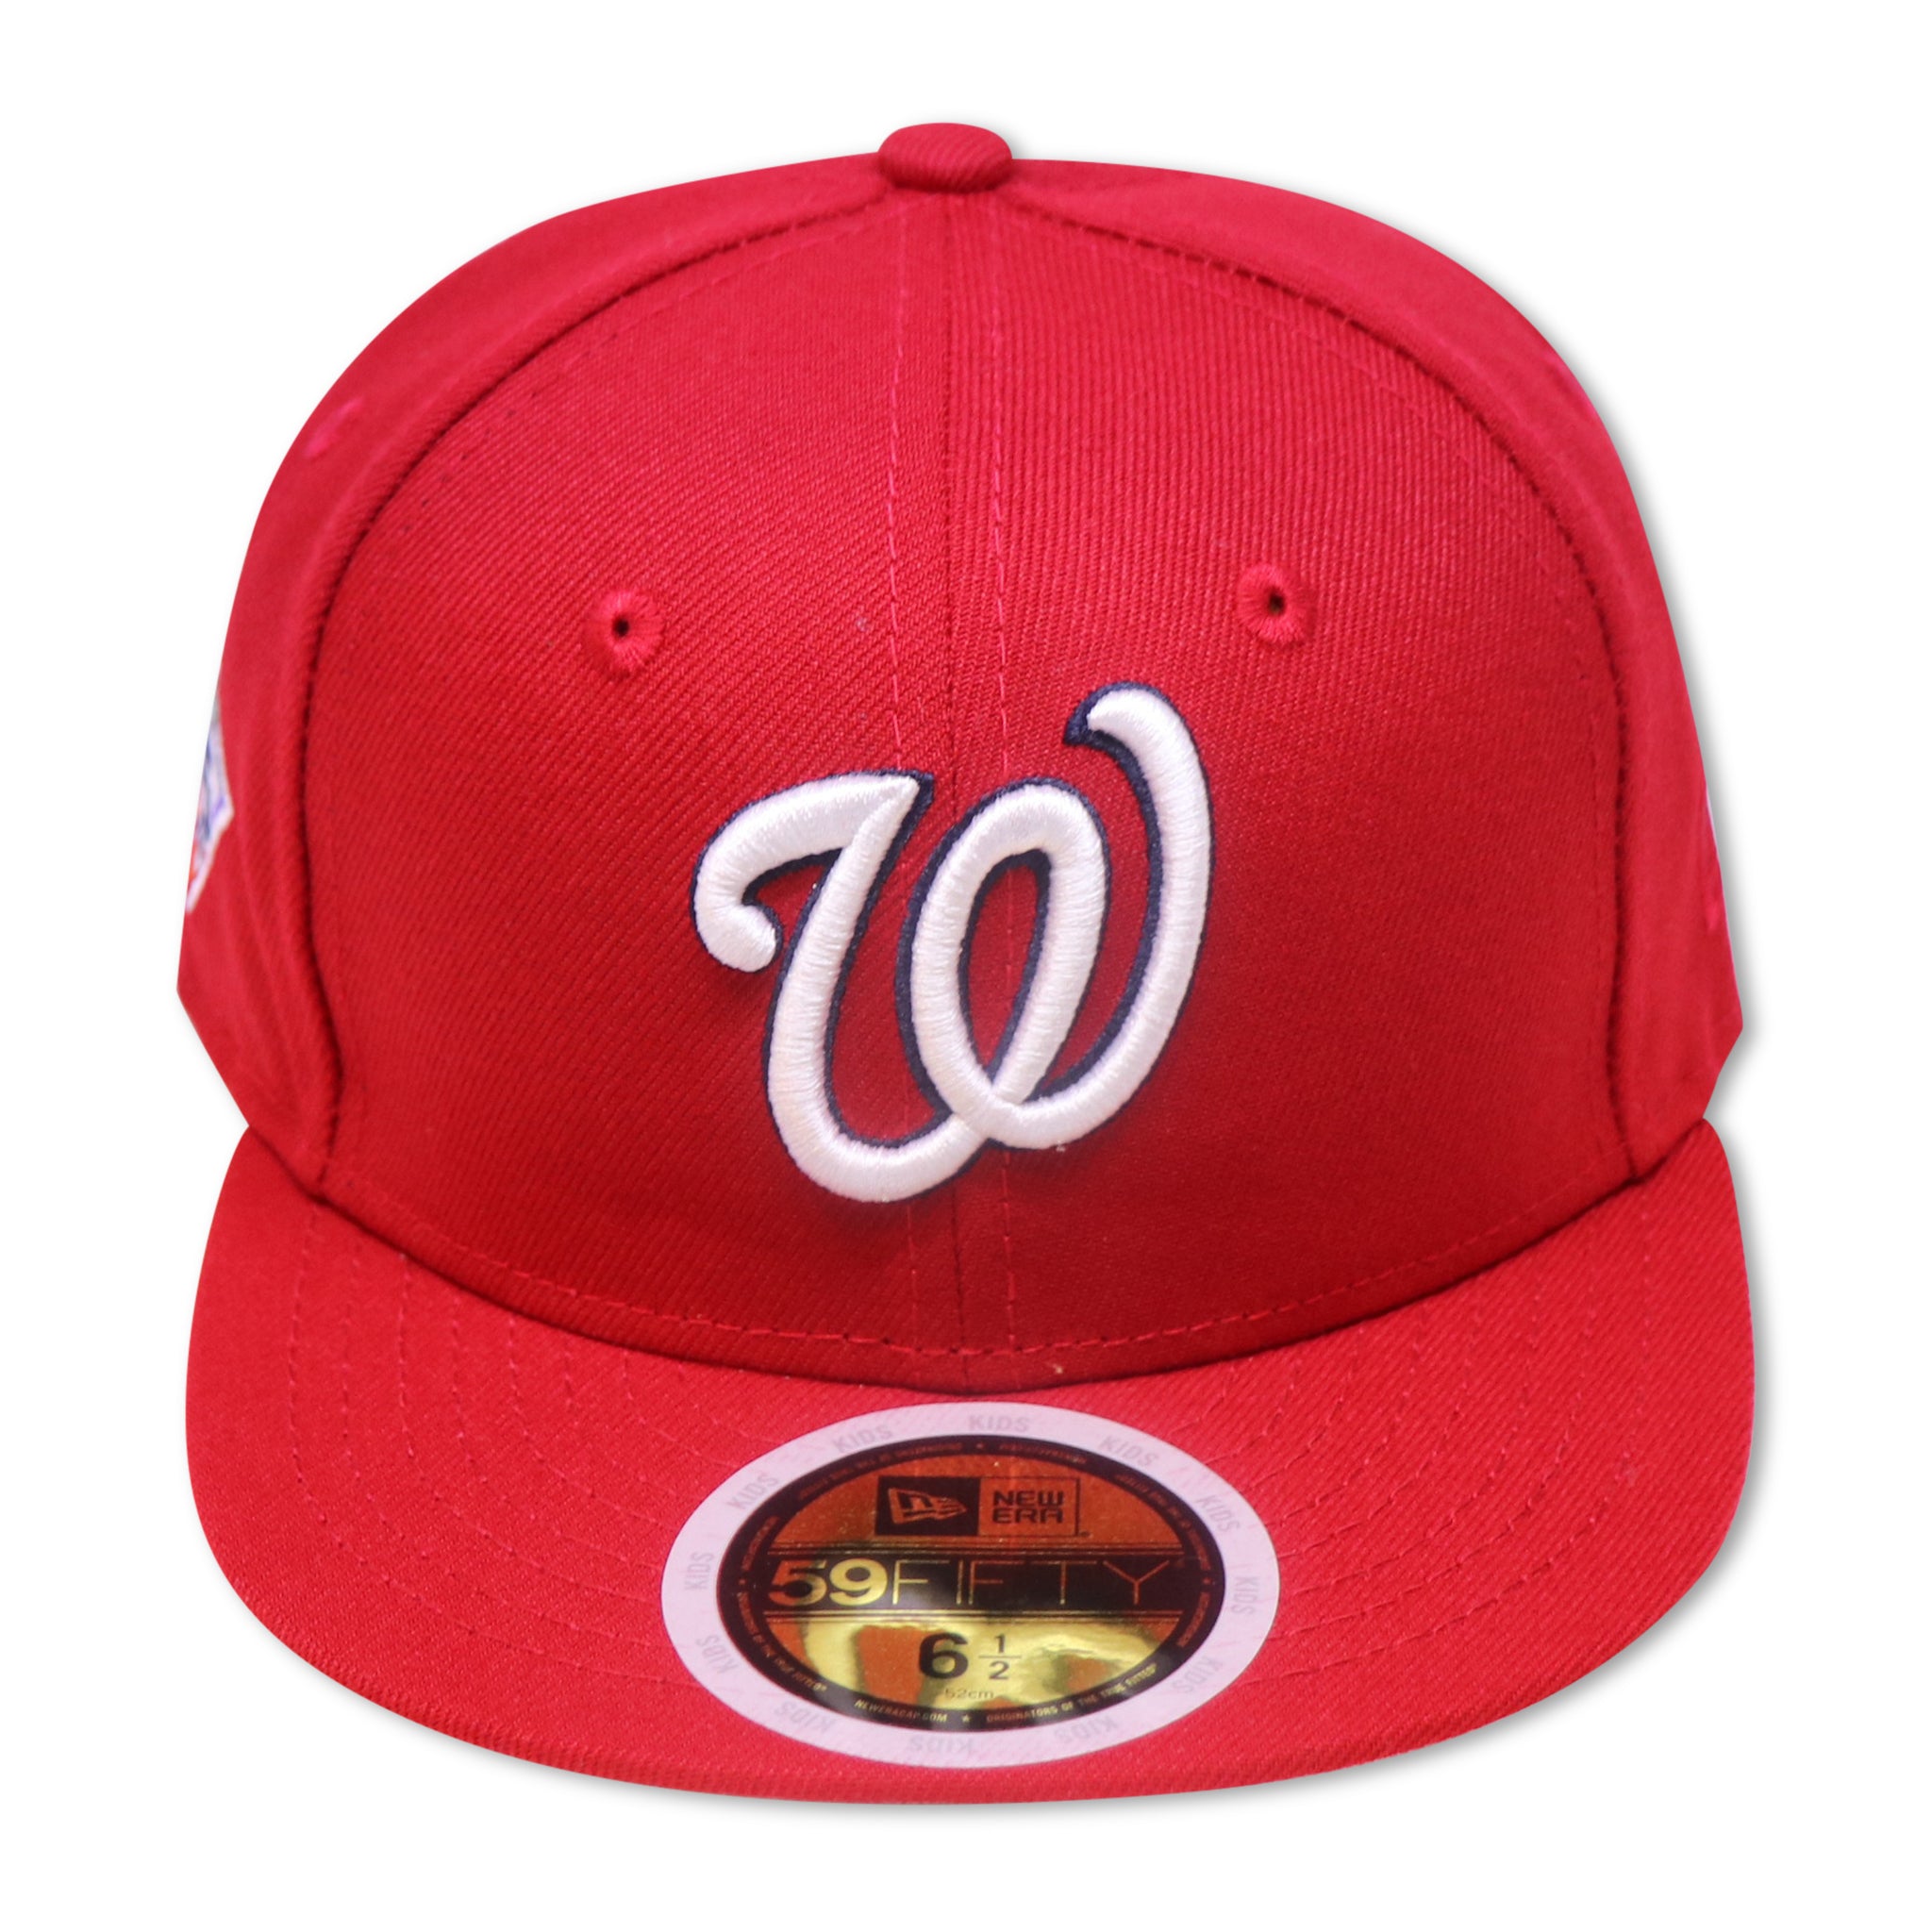 KIDS - WASHINGTON NATIONALS RED "2019 WORLD SERIES" NEW ERA 59FIFTY FITTED (PINK BOTTOM)